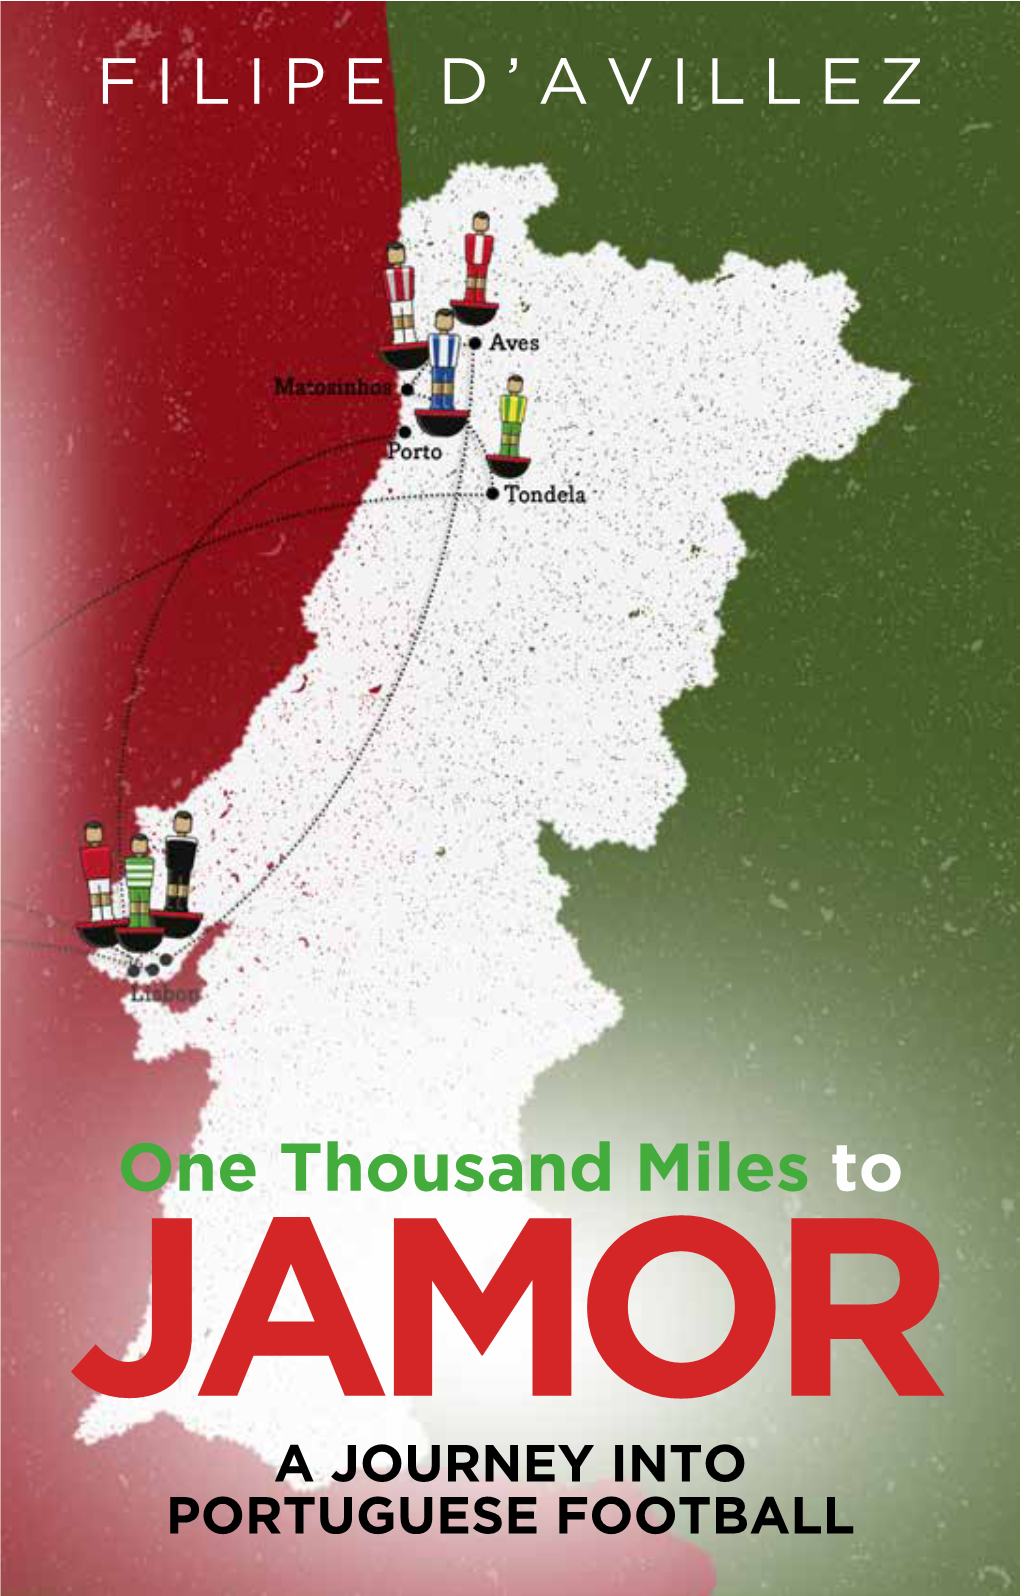 One Thousand Miles to JAMOR a JOURNEY INTO PORTUGUESE FOOTBALL One Thousand Miles from Contents